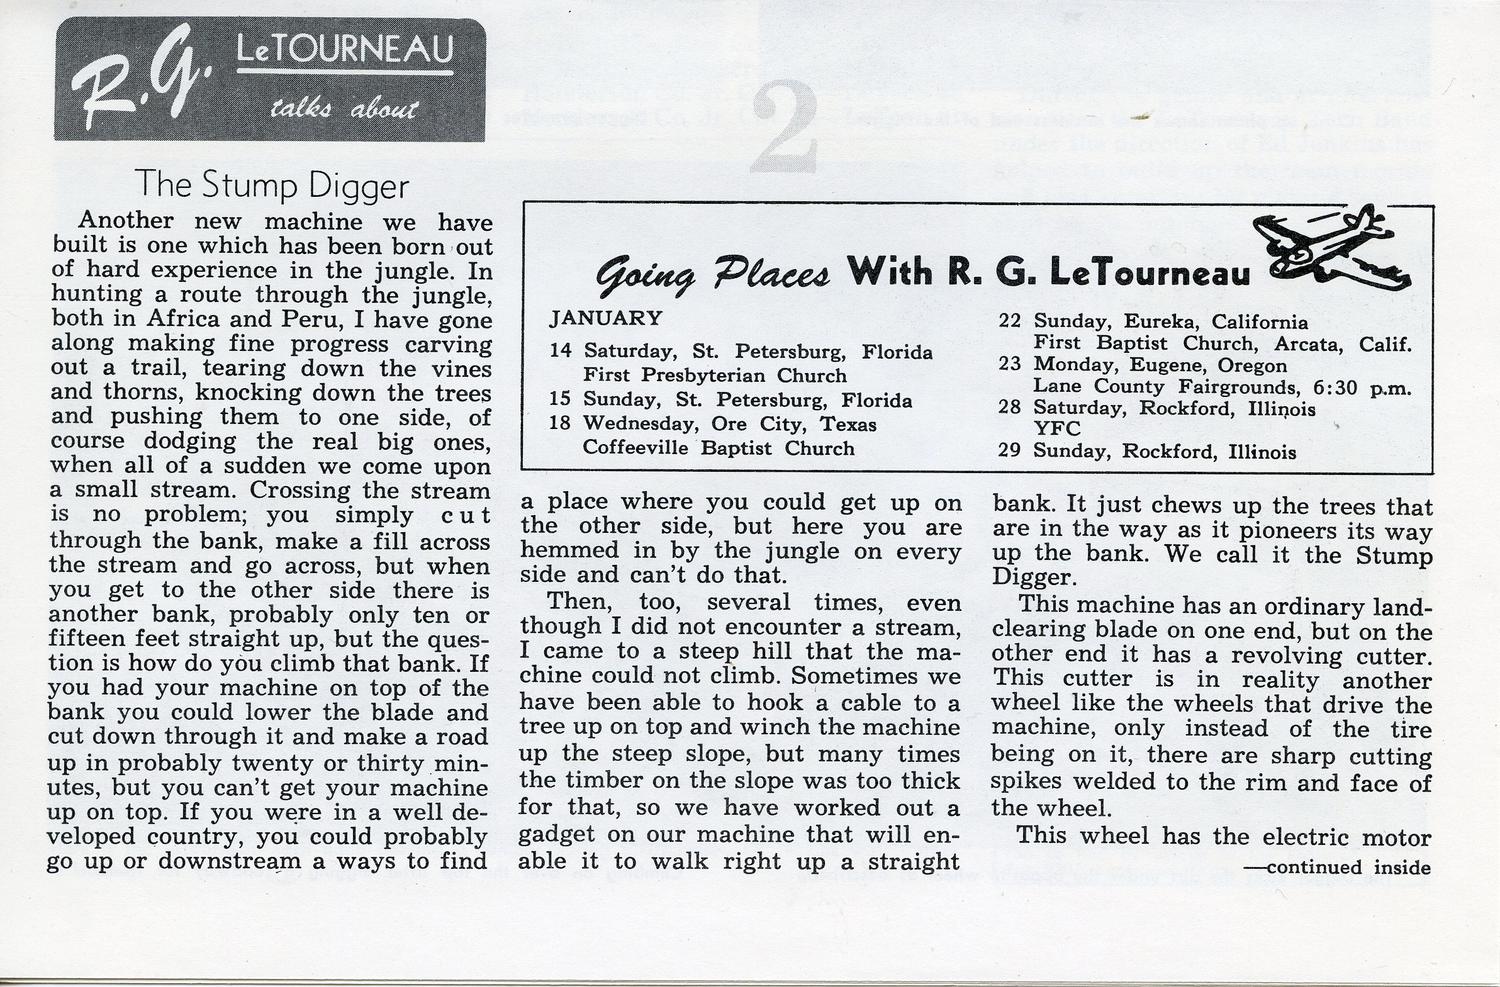 LeTourneau Tech's NOW, Volume 10, Number 2, January 15, 1956
                                                
                                                    2
                                                